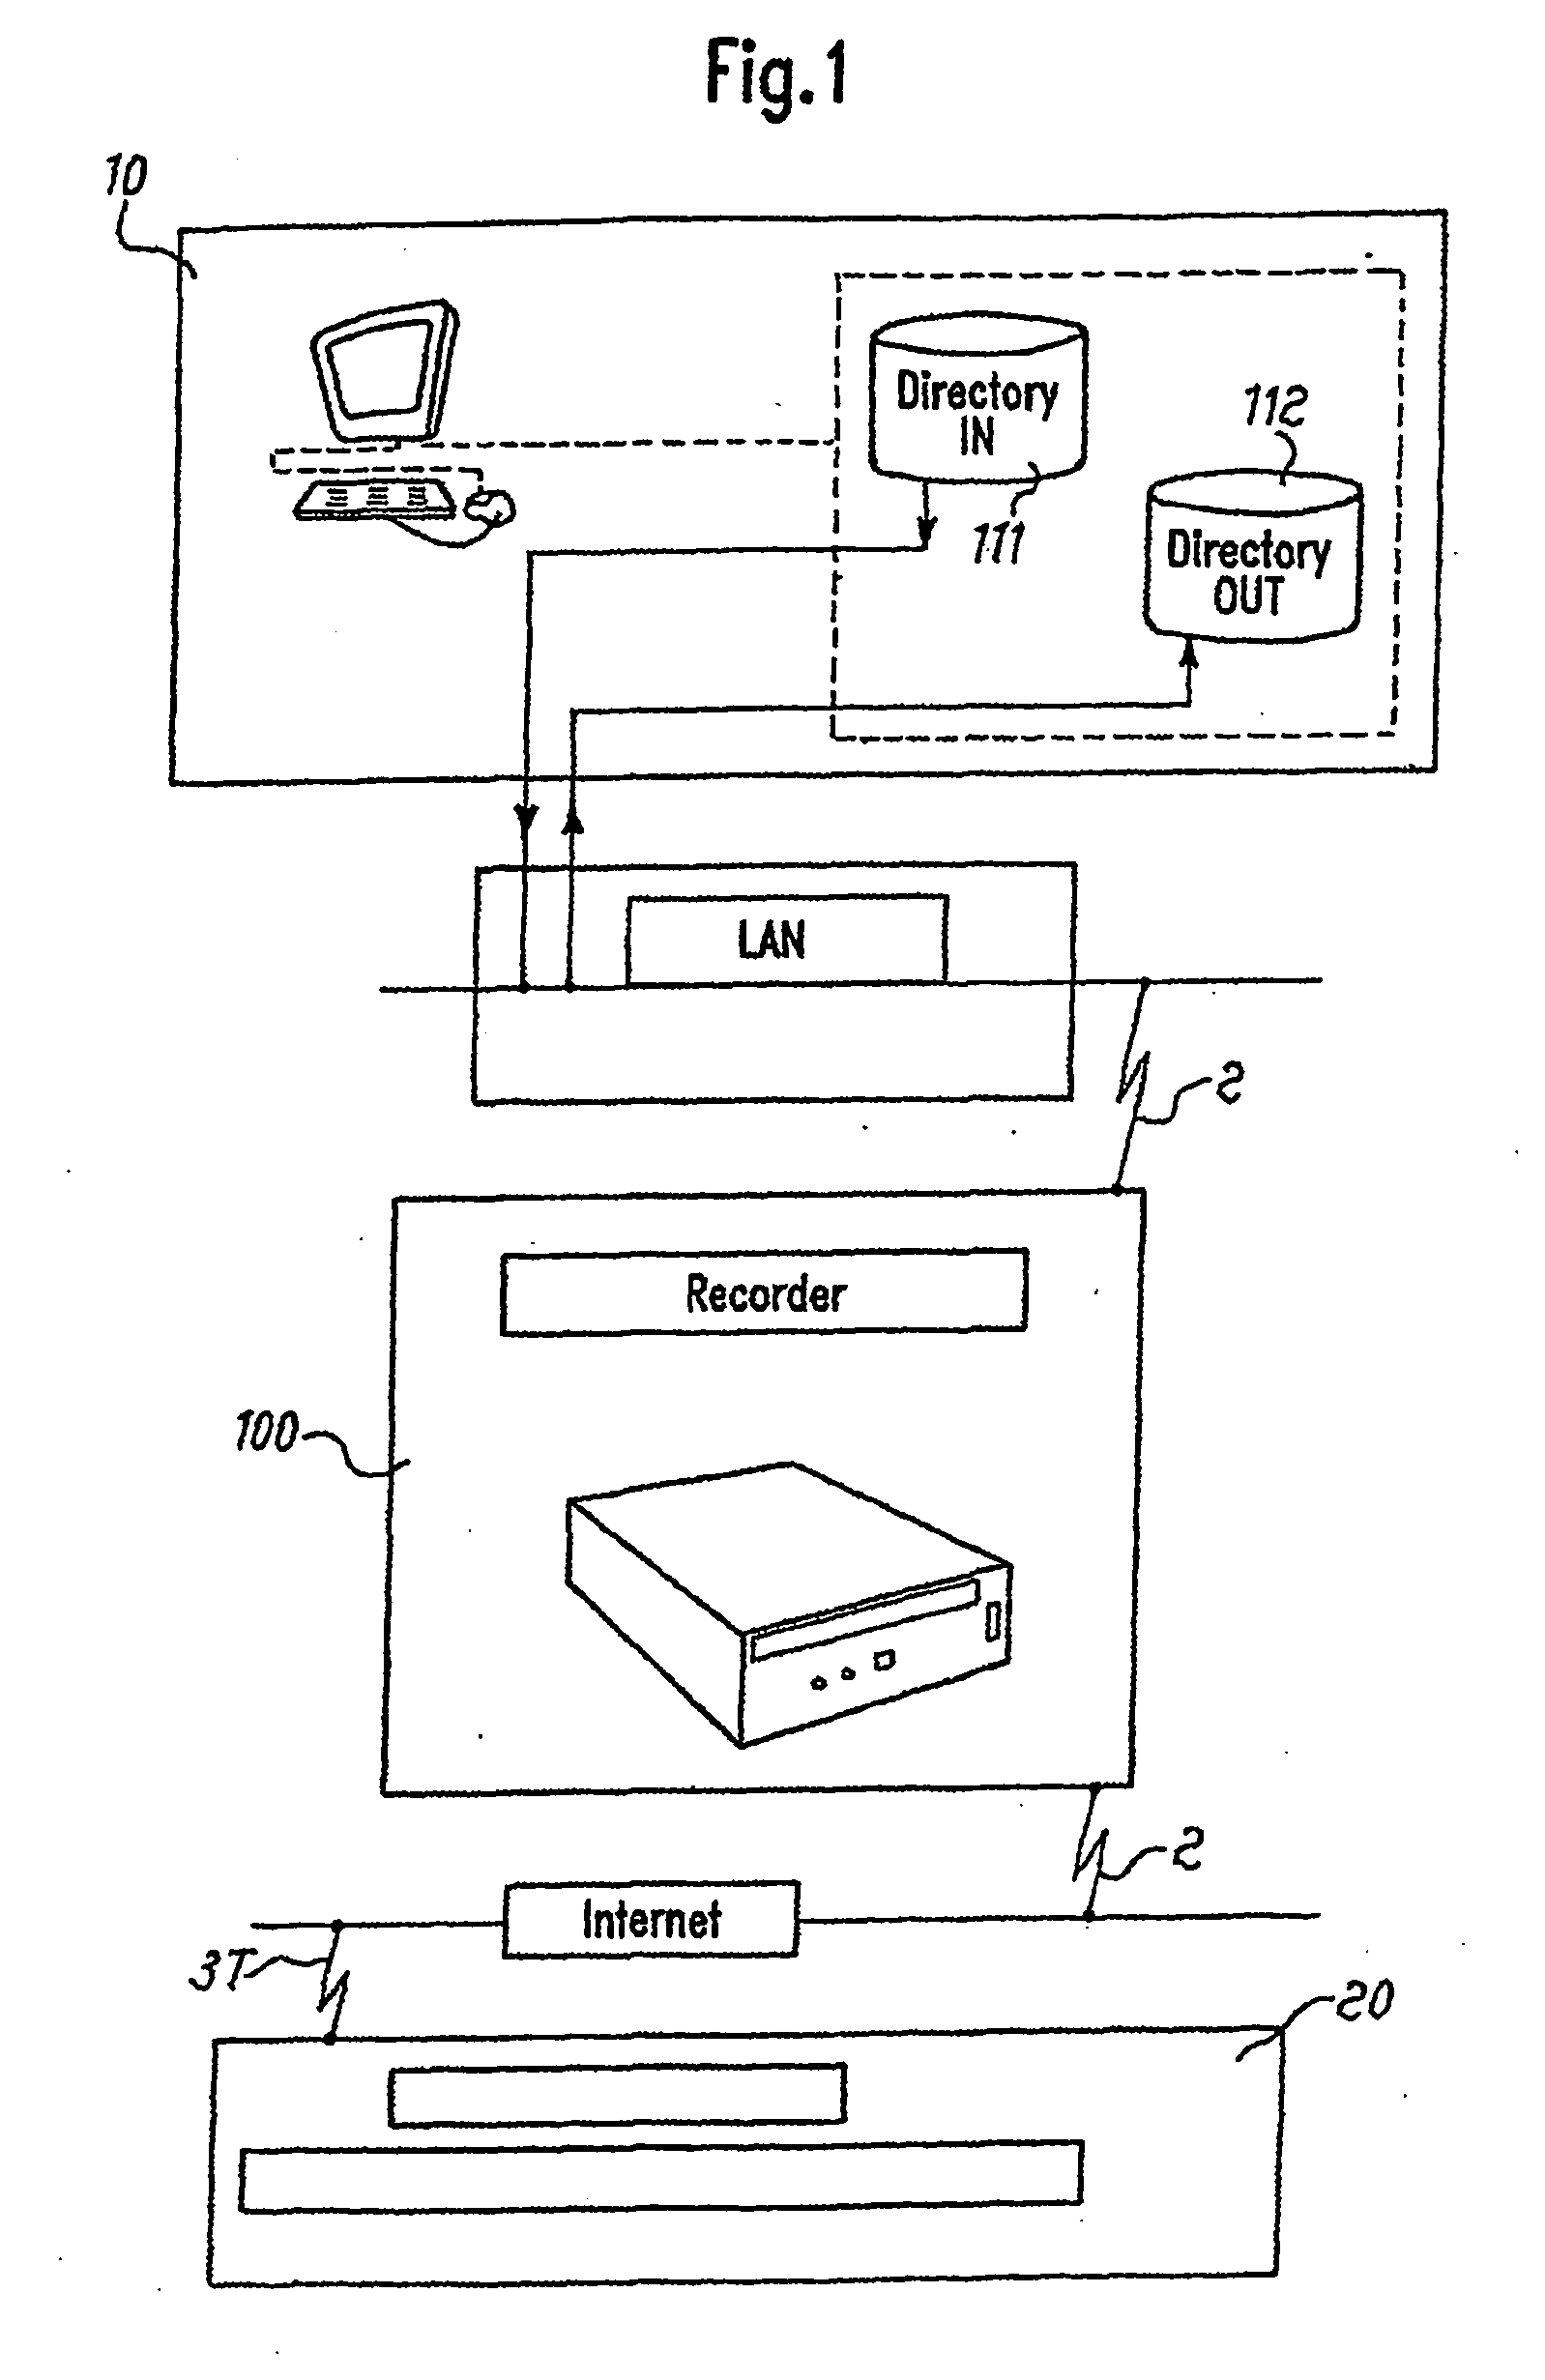 Method and a System for Authenticating and Recording Digital Documents and/or Files